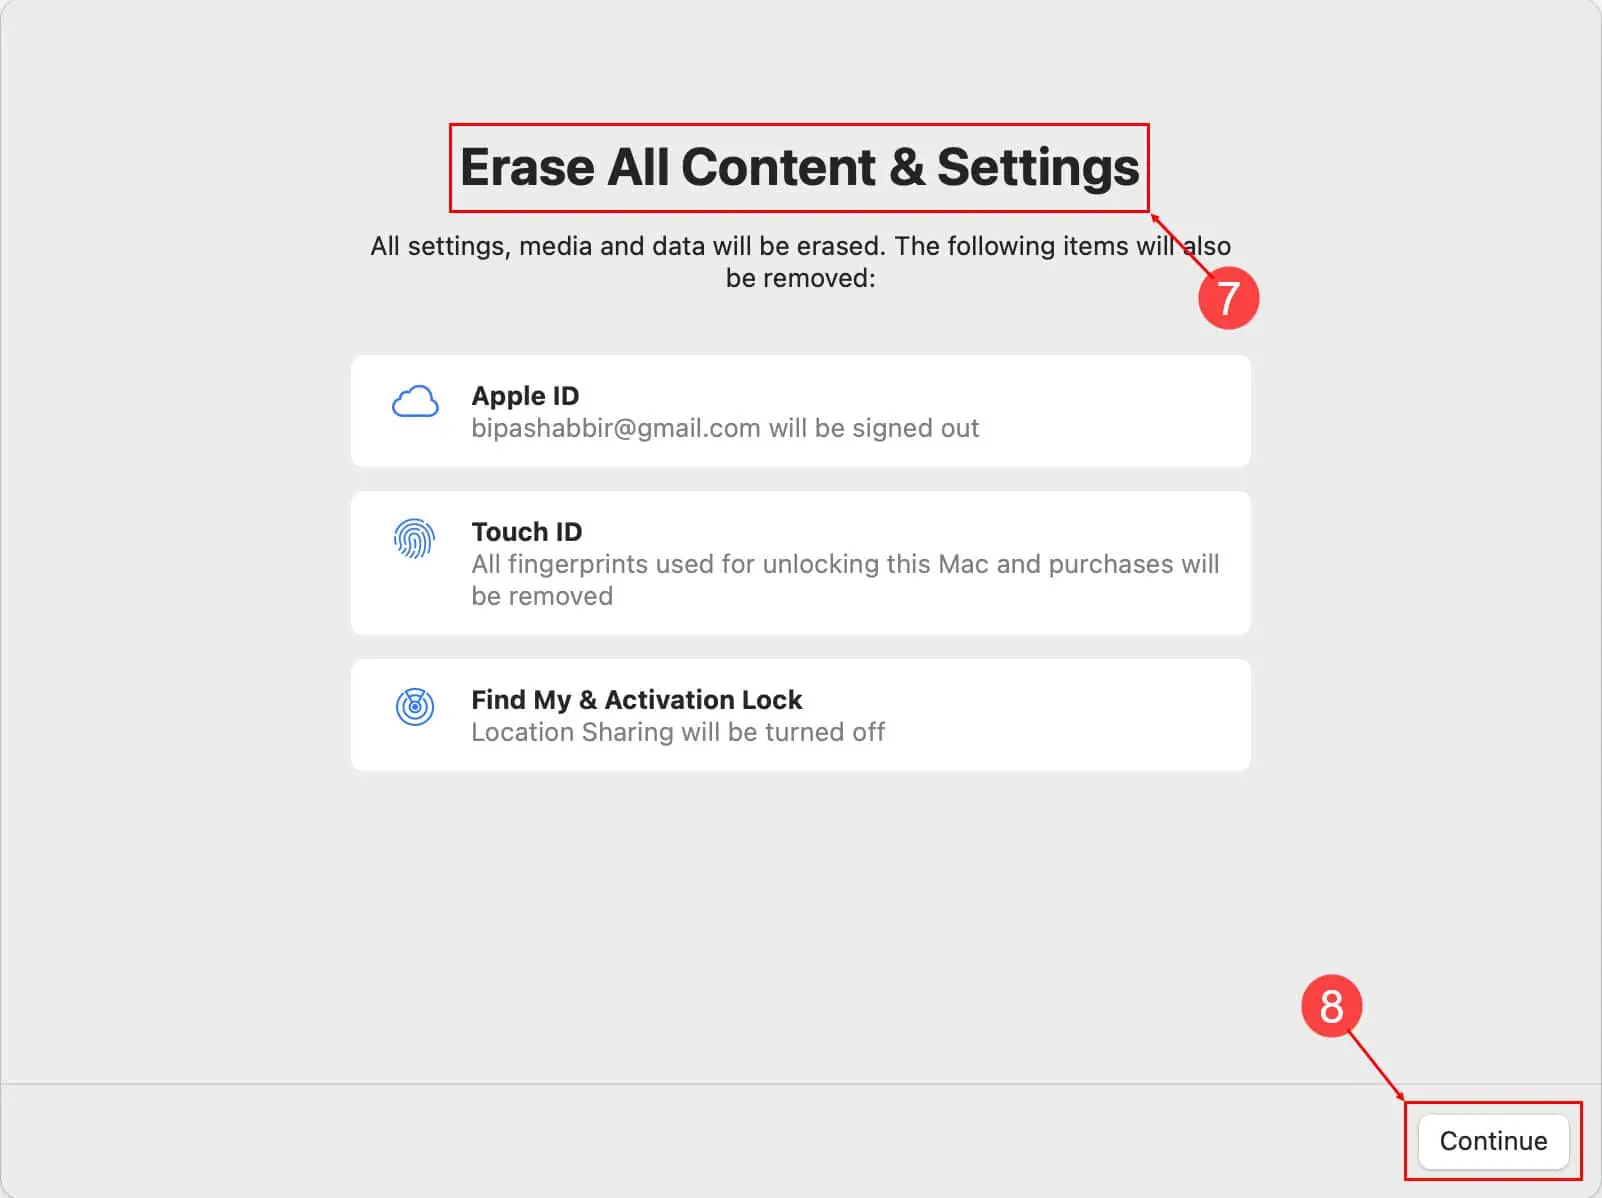 erase all content & settings on mac